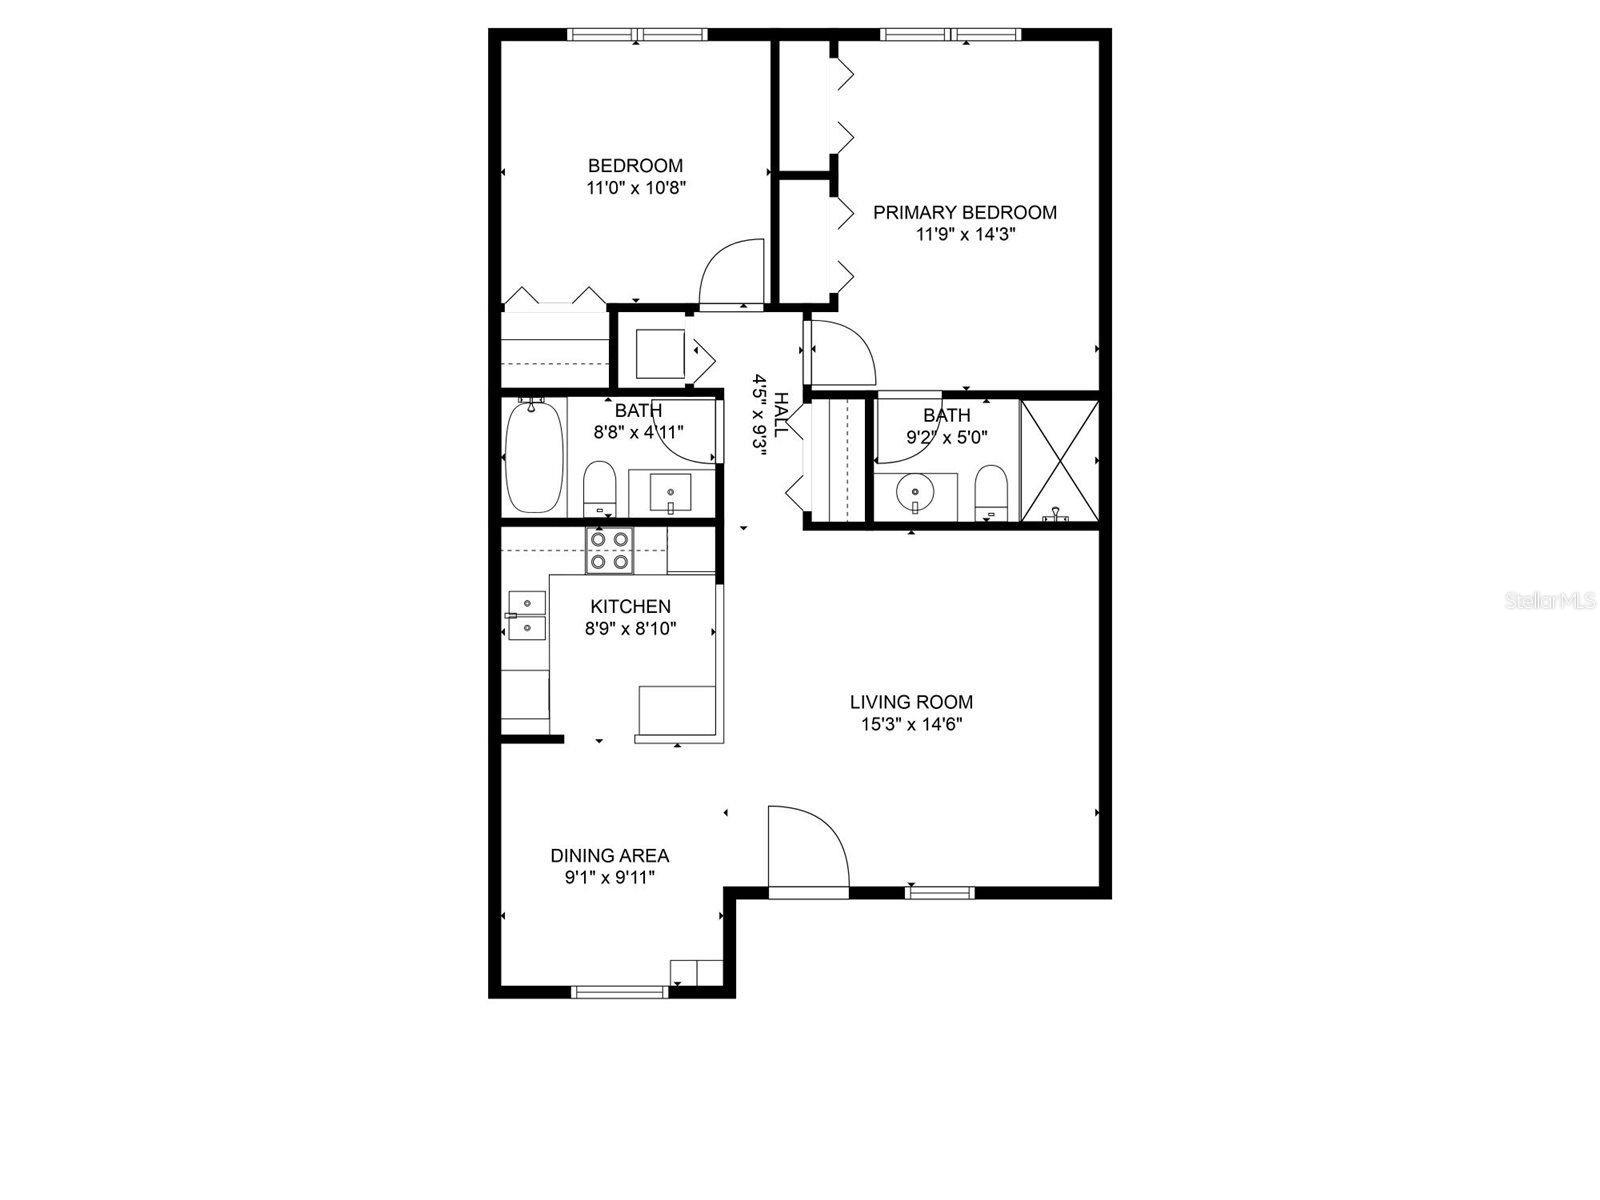 Floor plan with open layout.